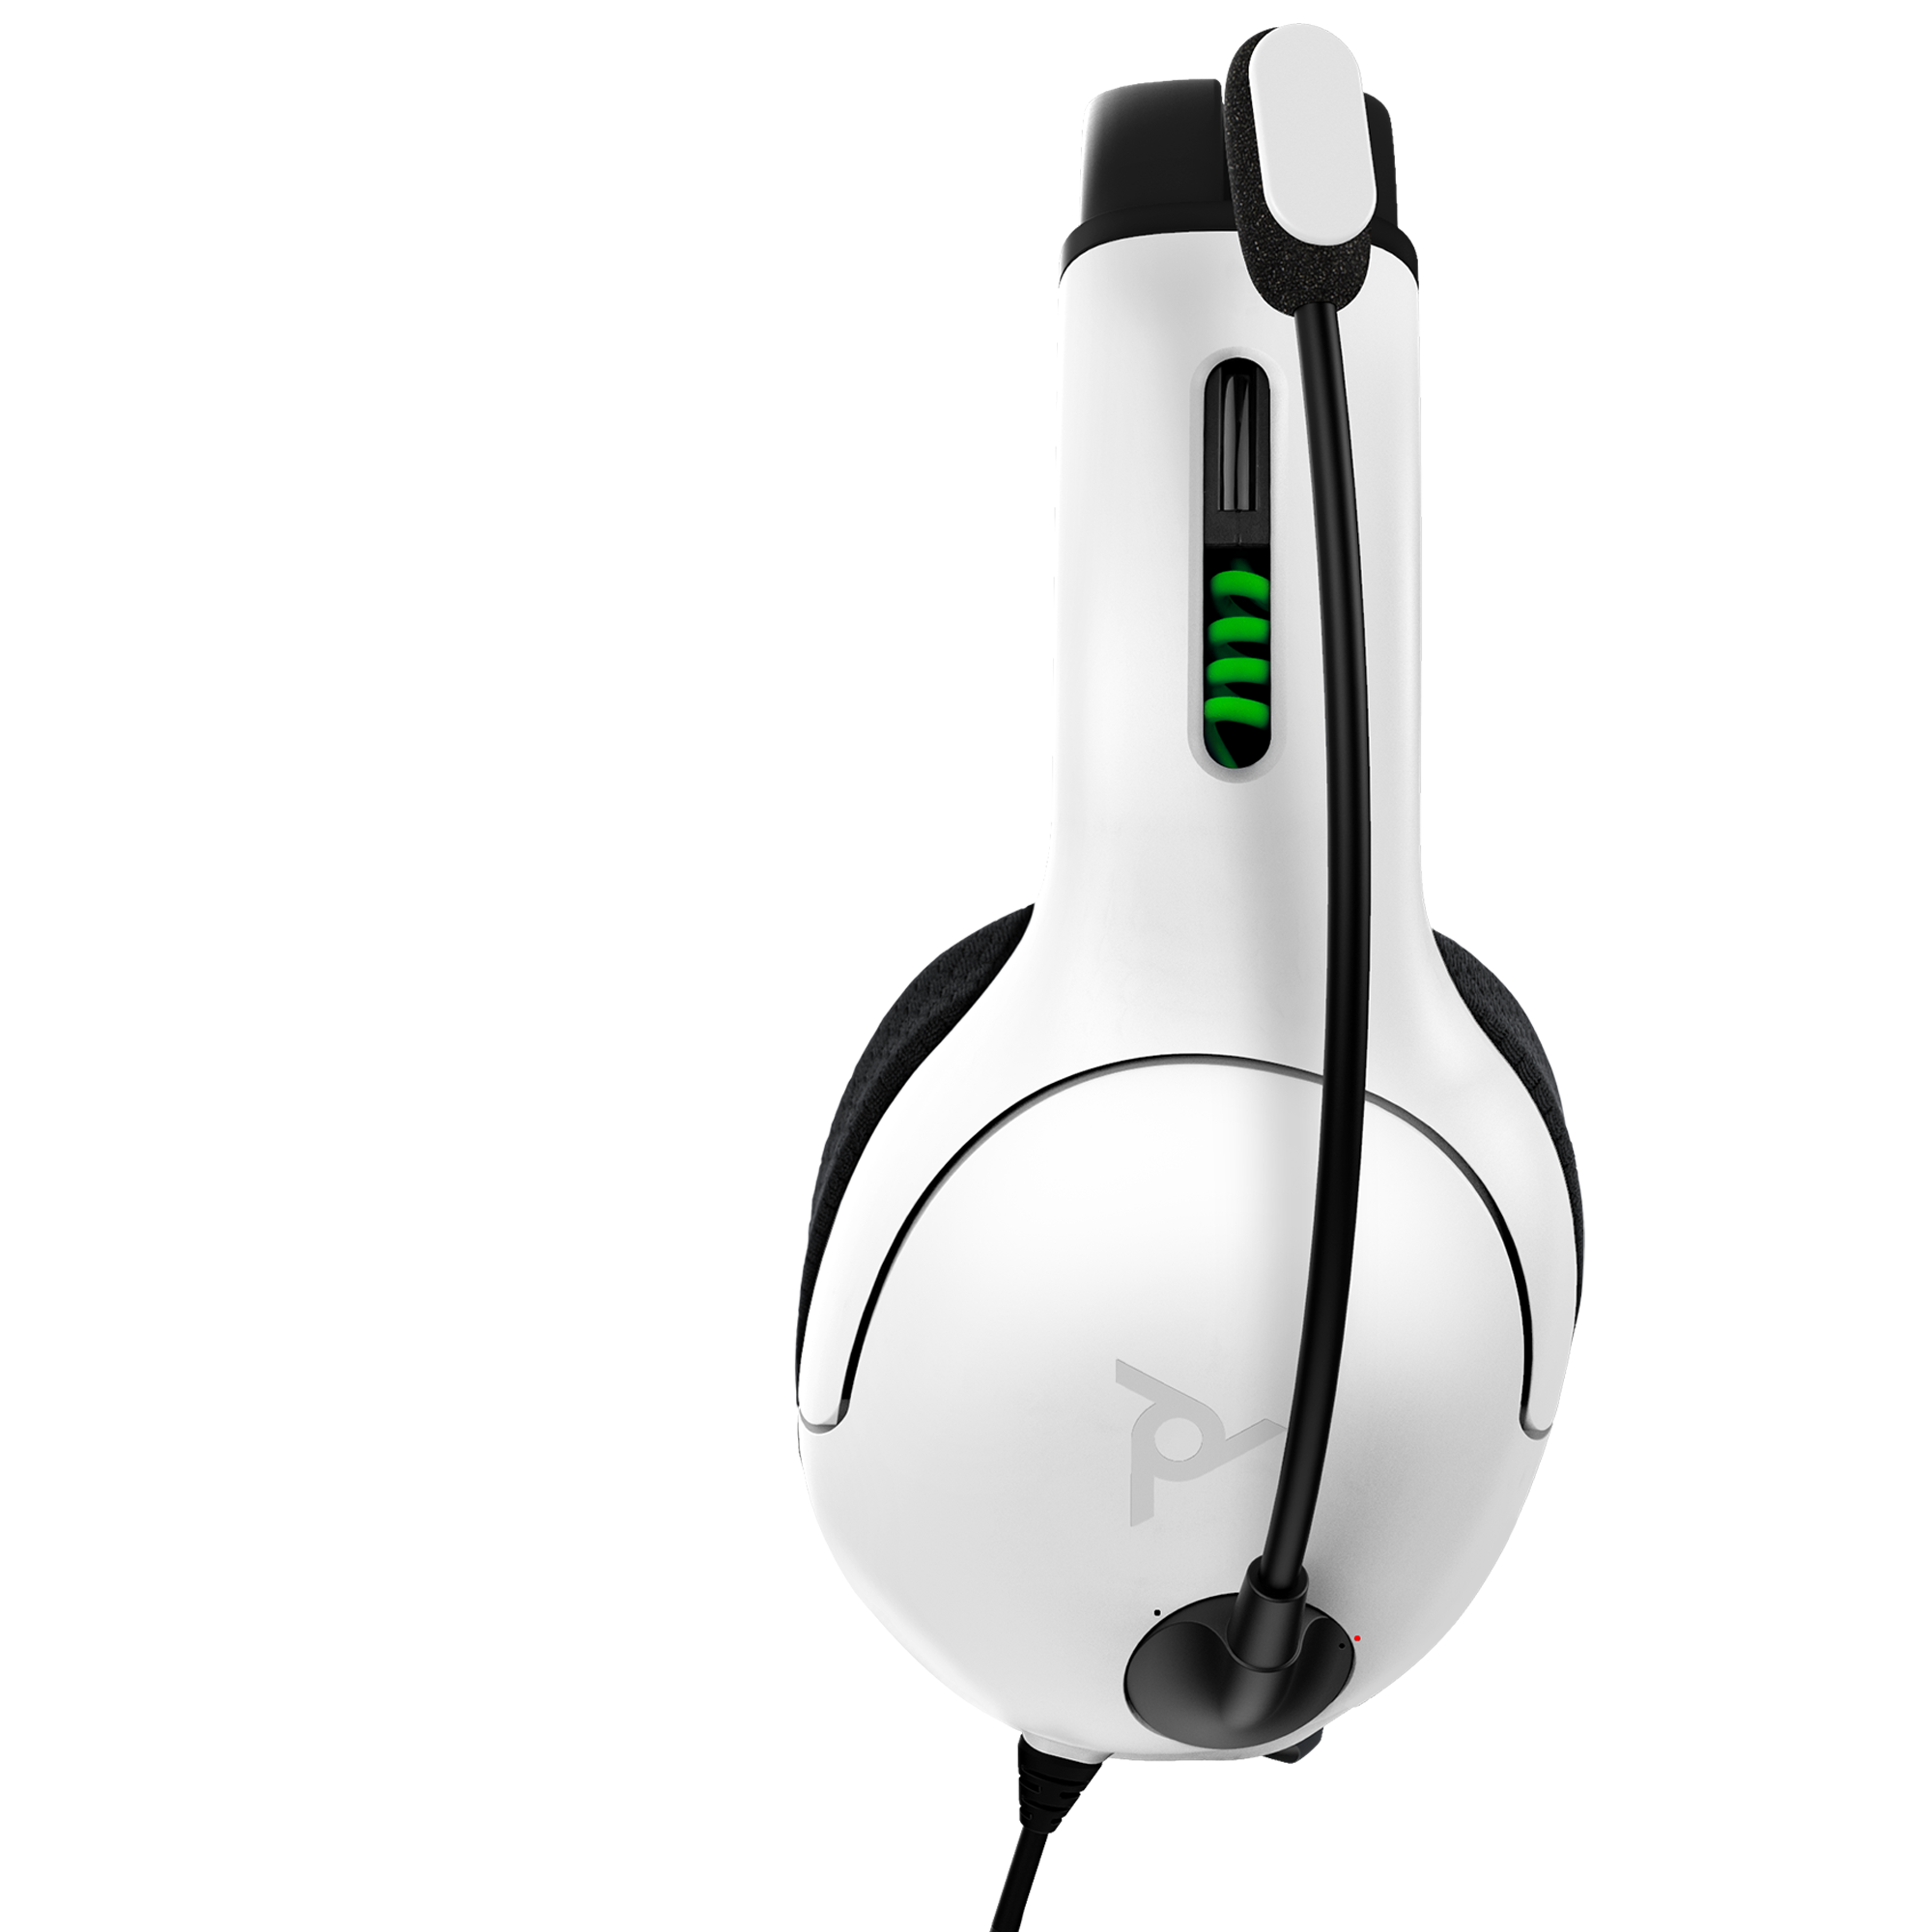 Pdp Gaming Lvl40 Stereo Headset With Mic For Xbox One, Series X